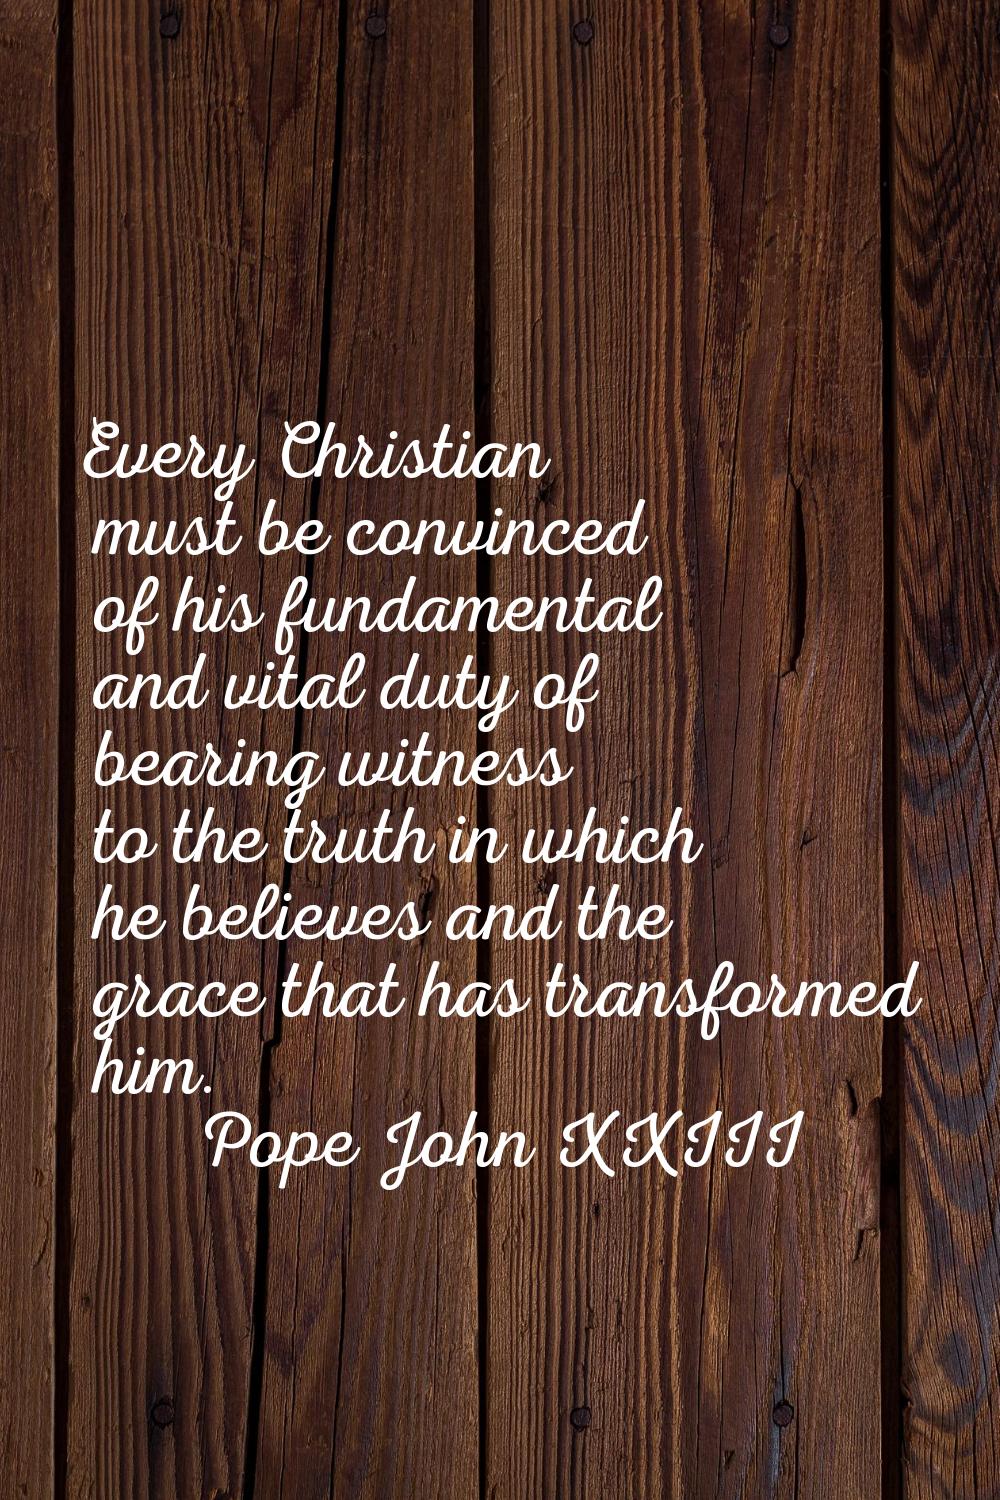 Every Christian must be convinced of his fundamental and vital duty of bearing witness to the truth